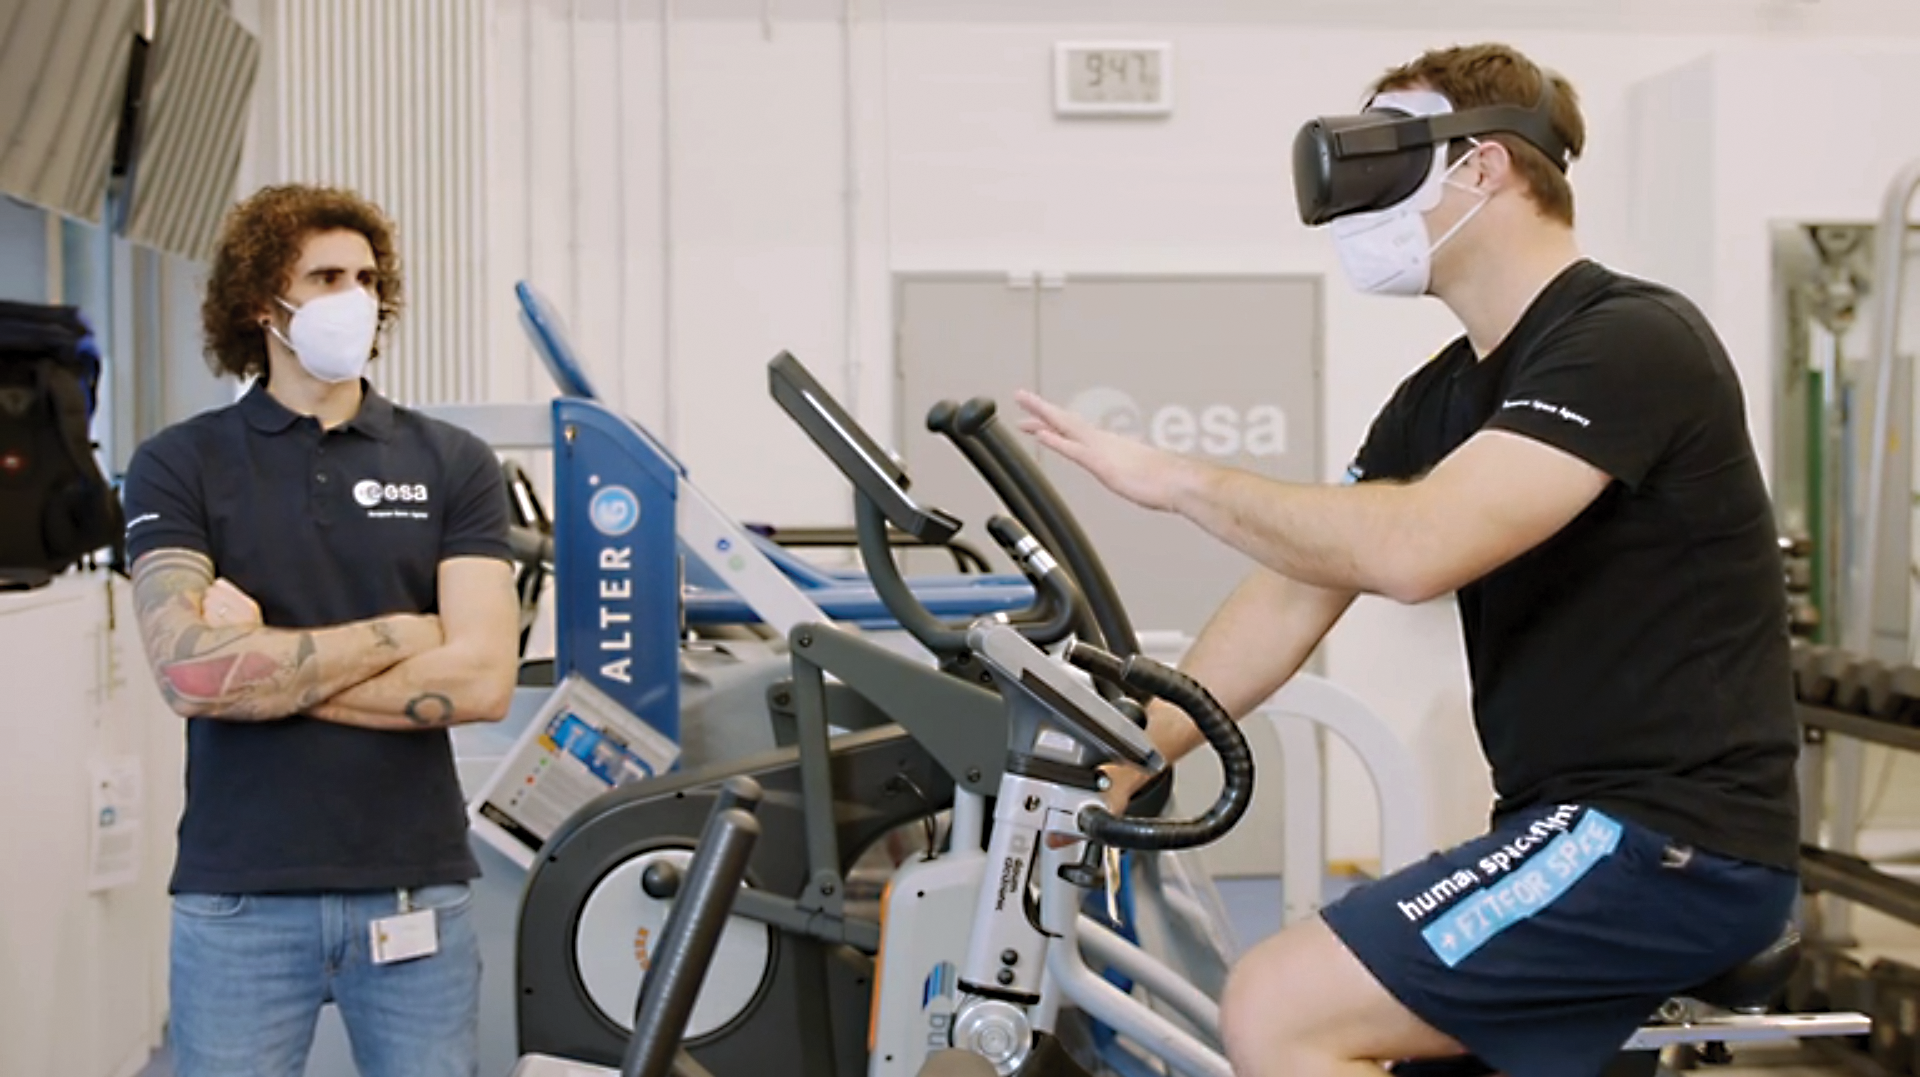 image of an astronaut riding a stationary bike wearing VR goggles